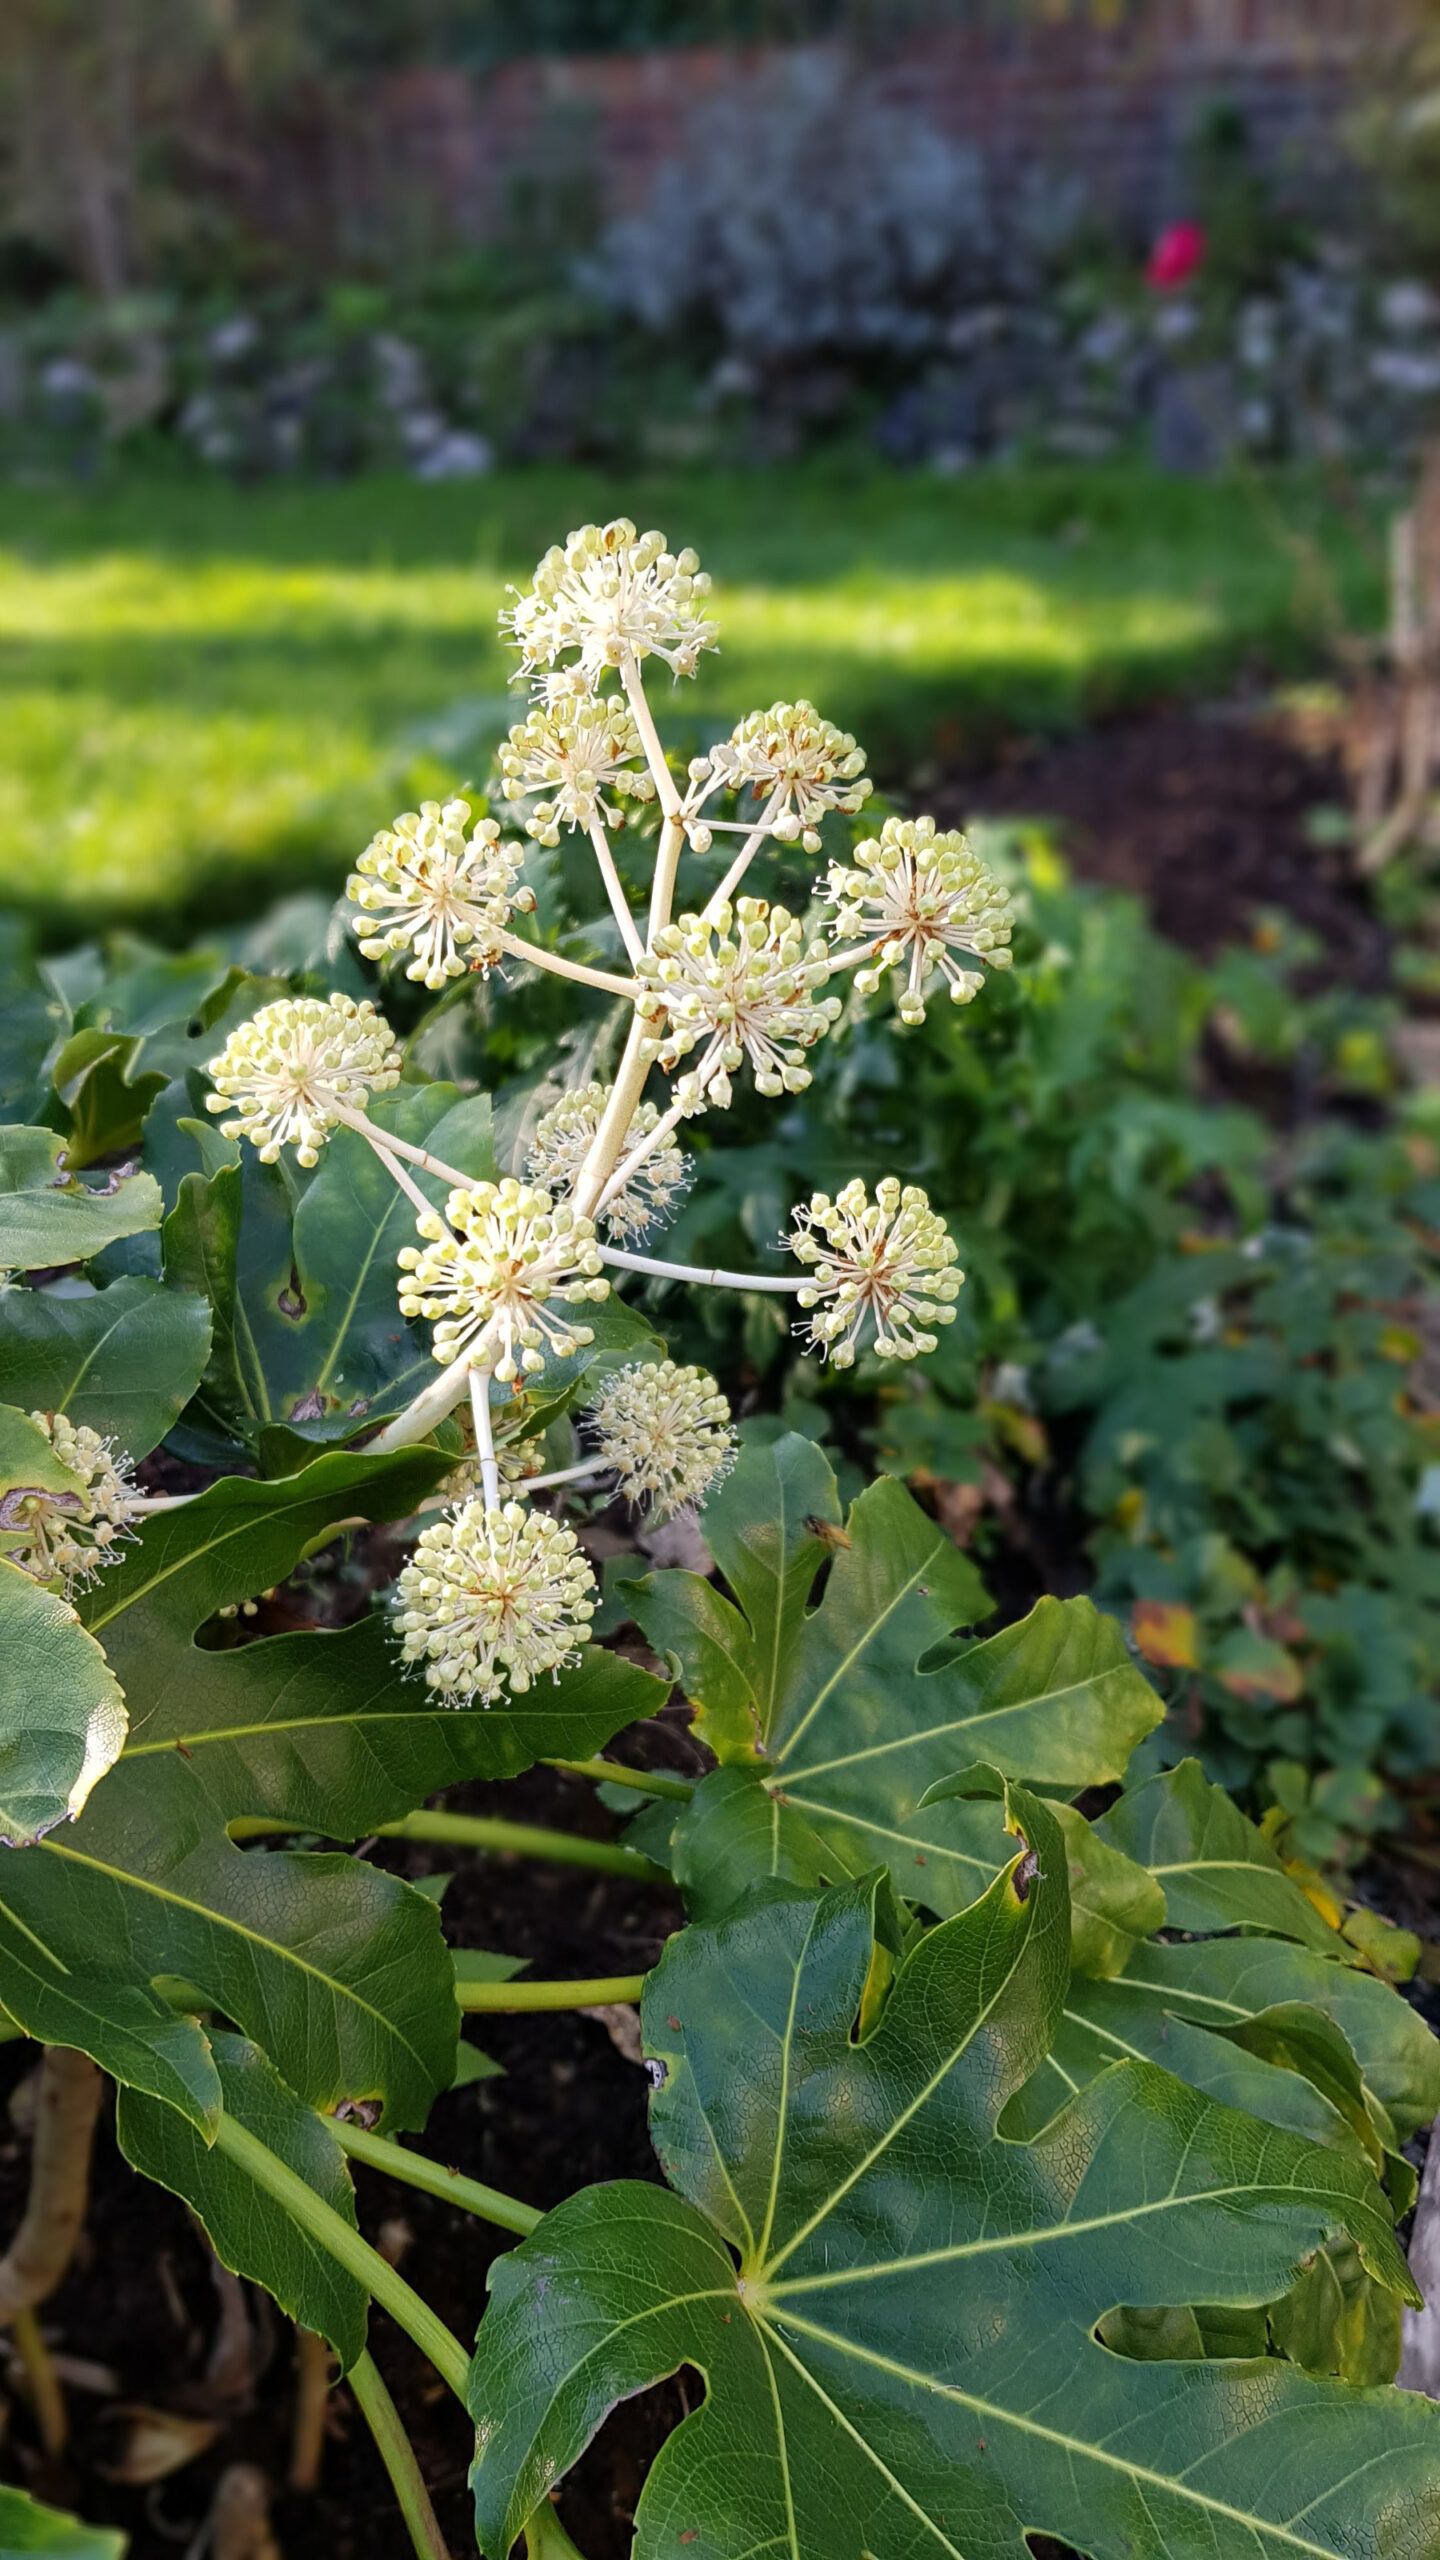 Fatsia Japonica started flowering in November